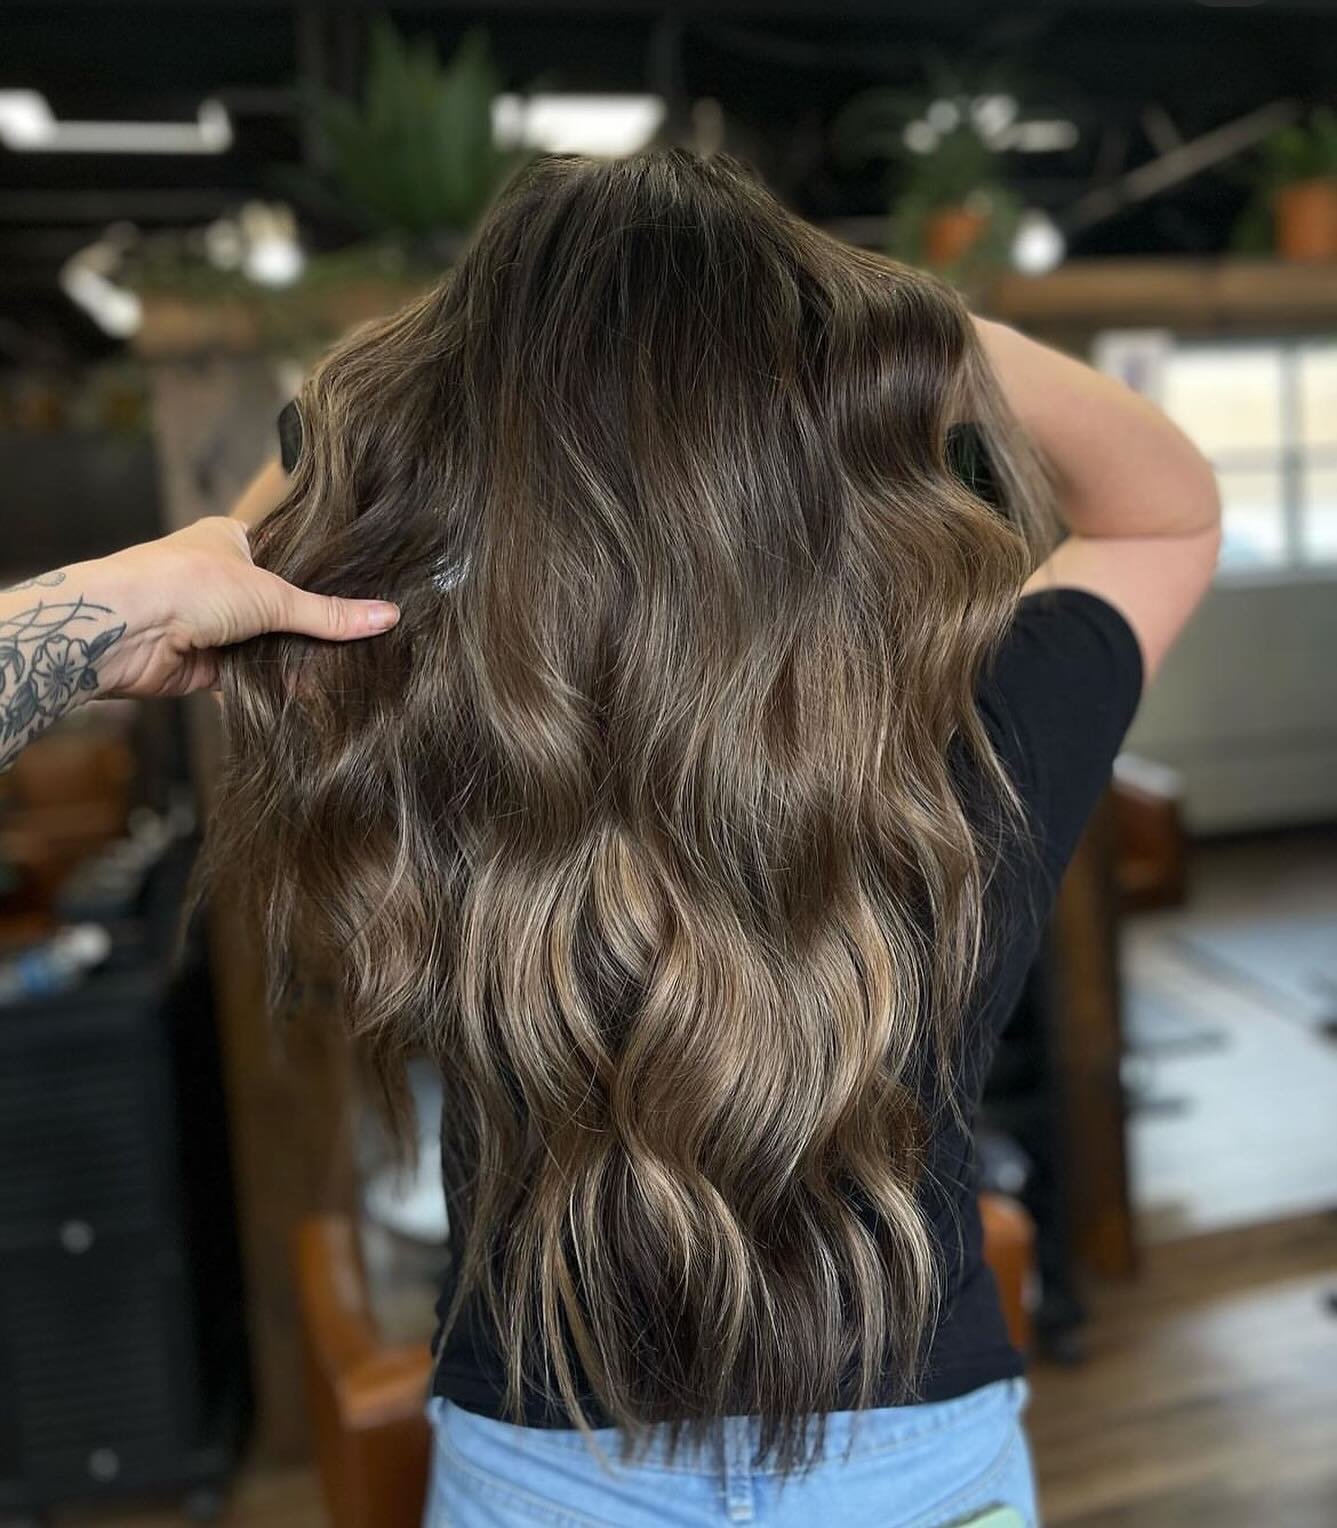 @hairxhannahleigh did the dang thing!! Wedding hair prep that turned out dreamy 💍
.
.
.
#thedrawingroomsalon #thedrawingroomsalonwaxahachie #bookthedrawingroom #goodhair #allyouneedisgoodhair #randco #waxahachie #waxahachietexas #waxahachiehair #ell